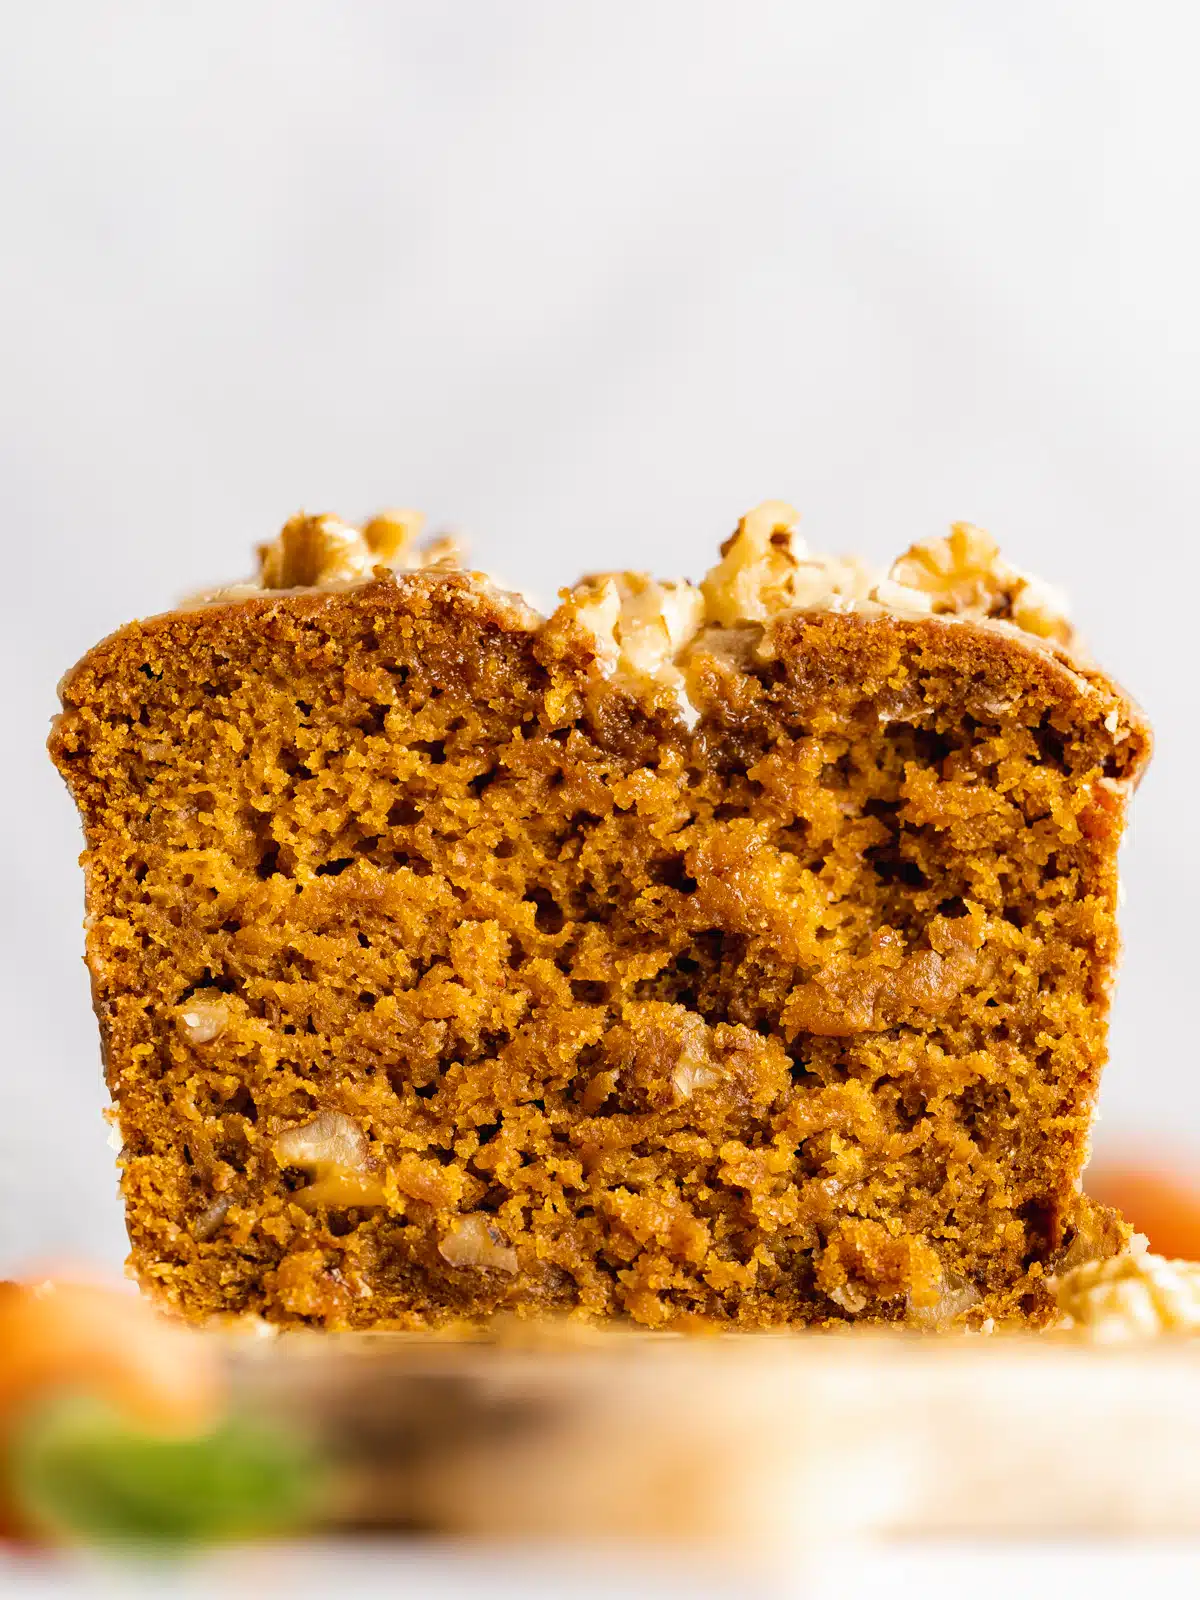 face on view of a carrot loaf cake with a slice cut away from it showing the fluffy and moist interior.